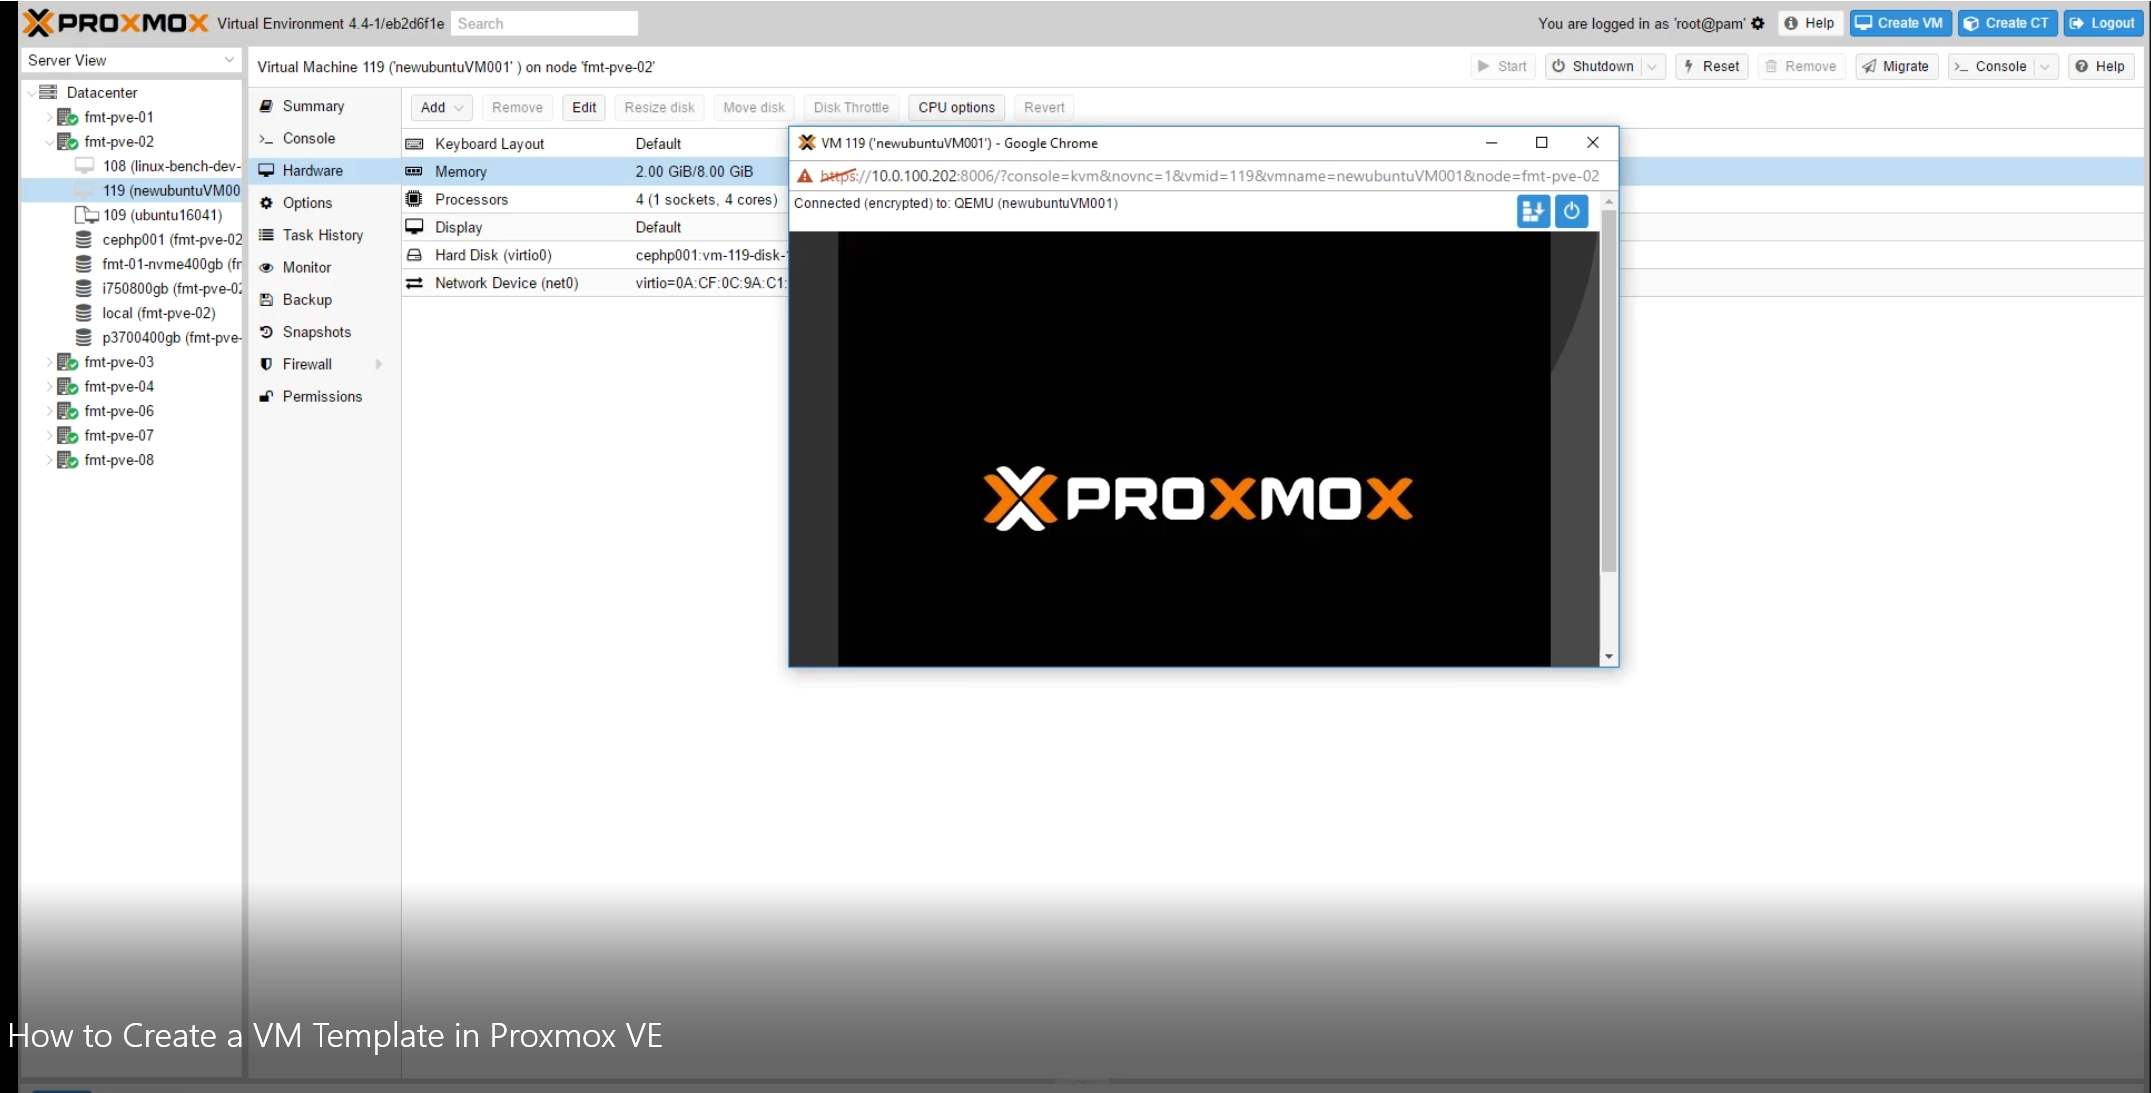 How To Create A VM Template In Proxmox VE